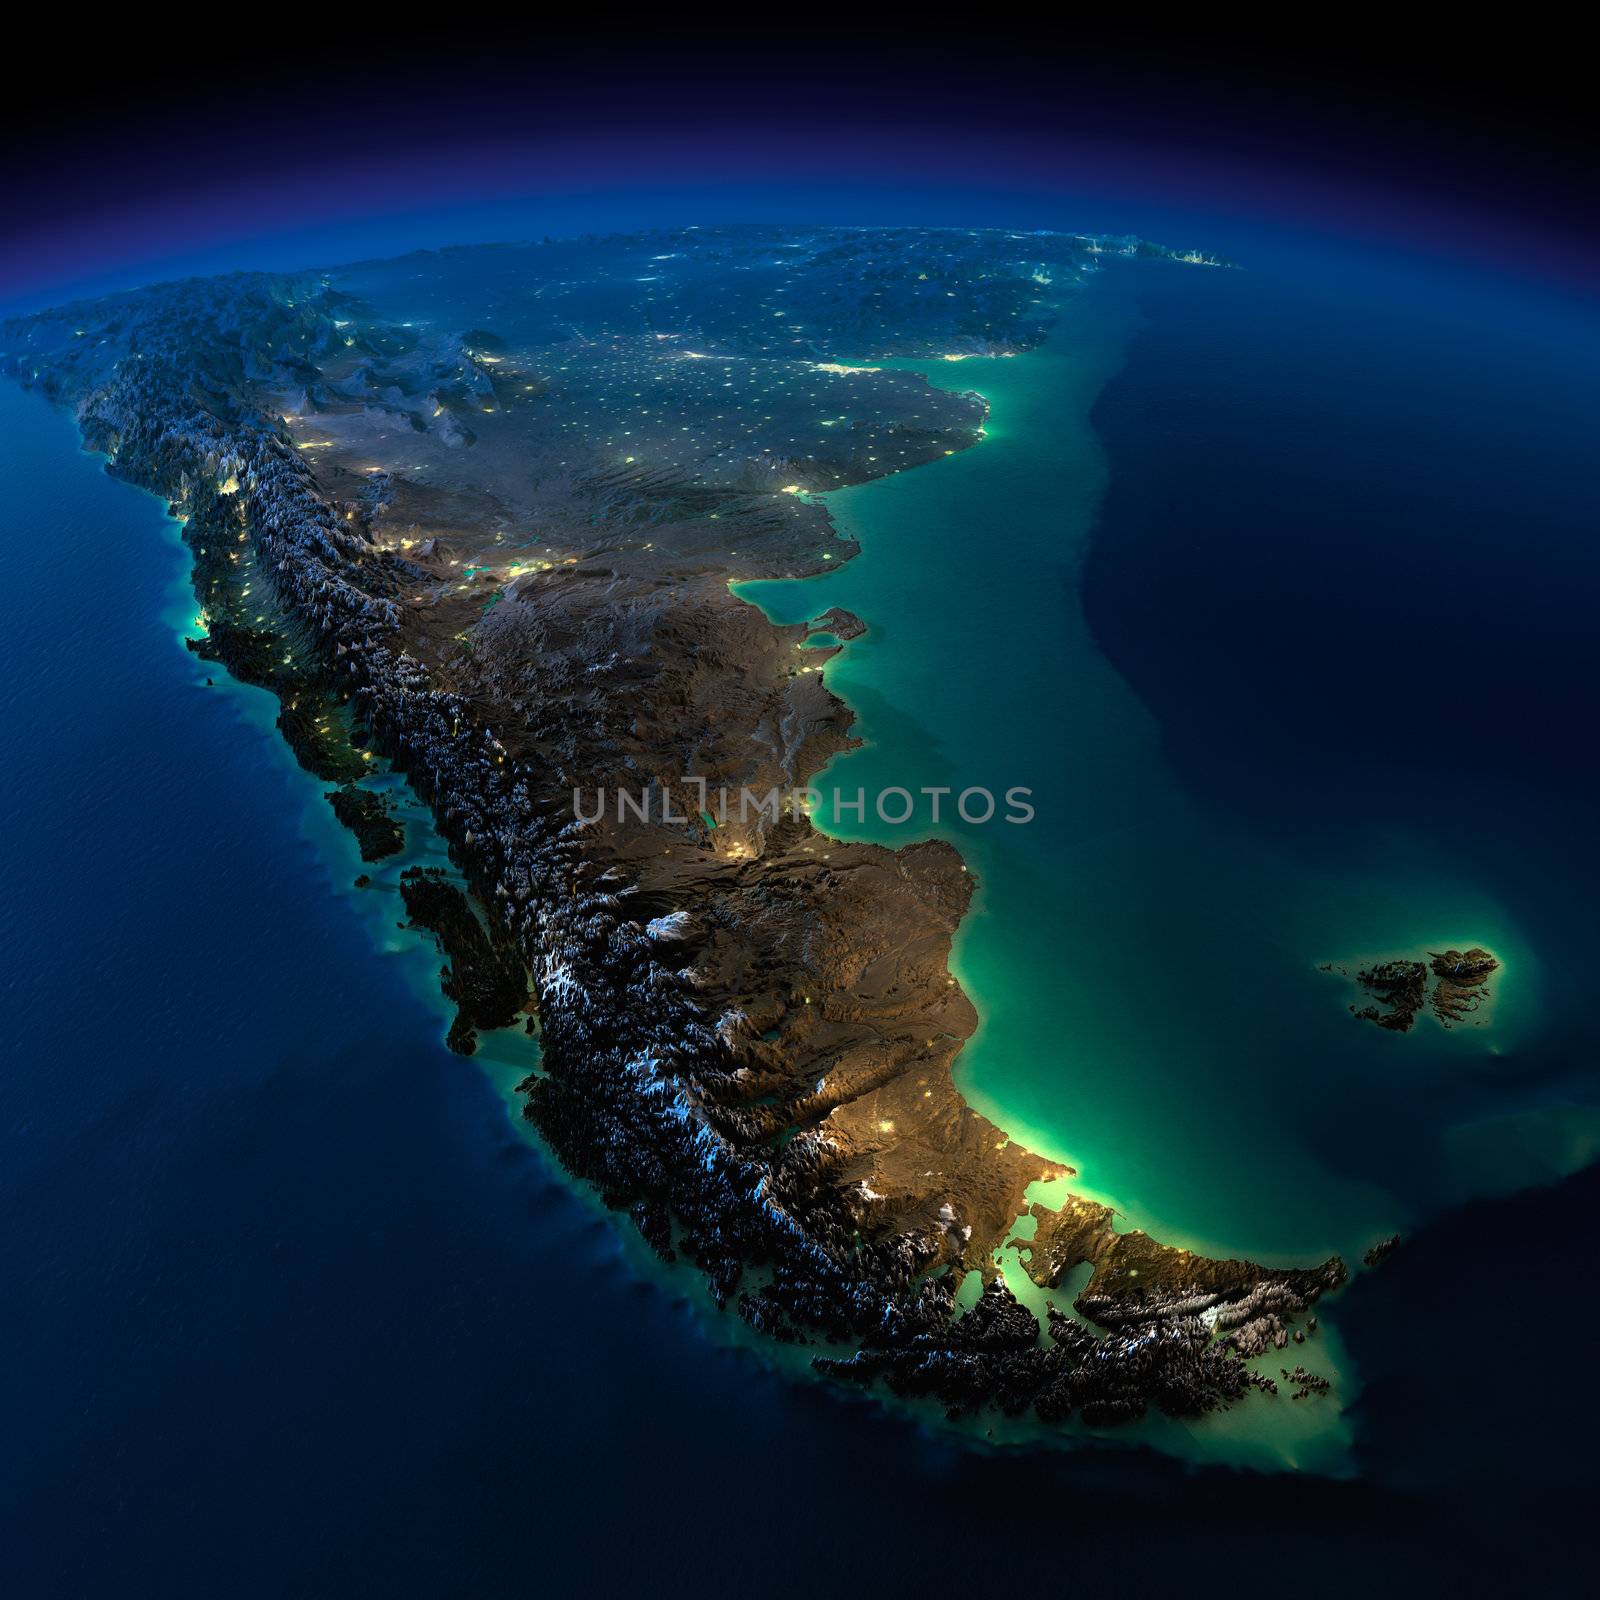 Night Earth. A piece of South America - Argentina and Chile by Antartis